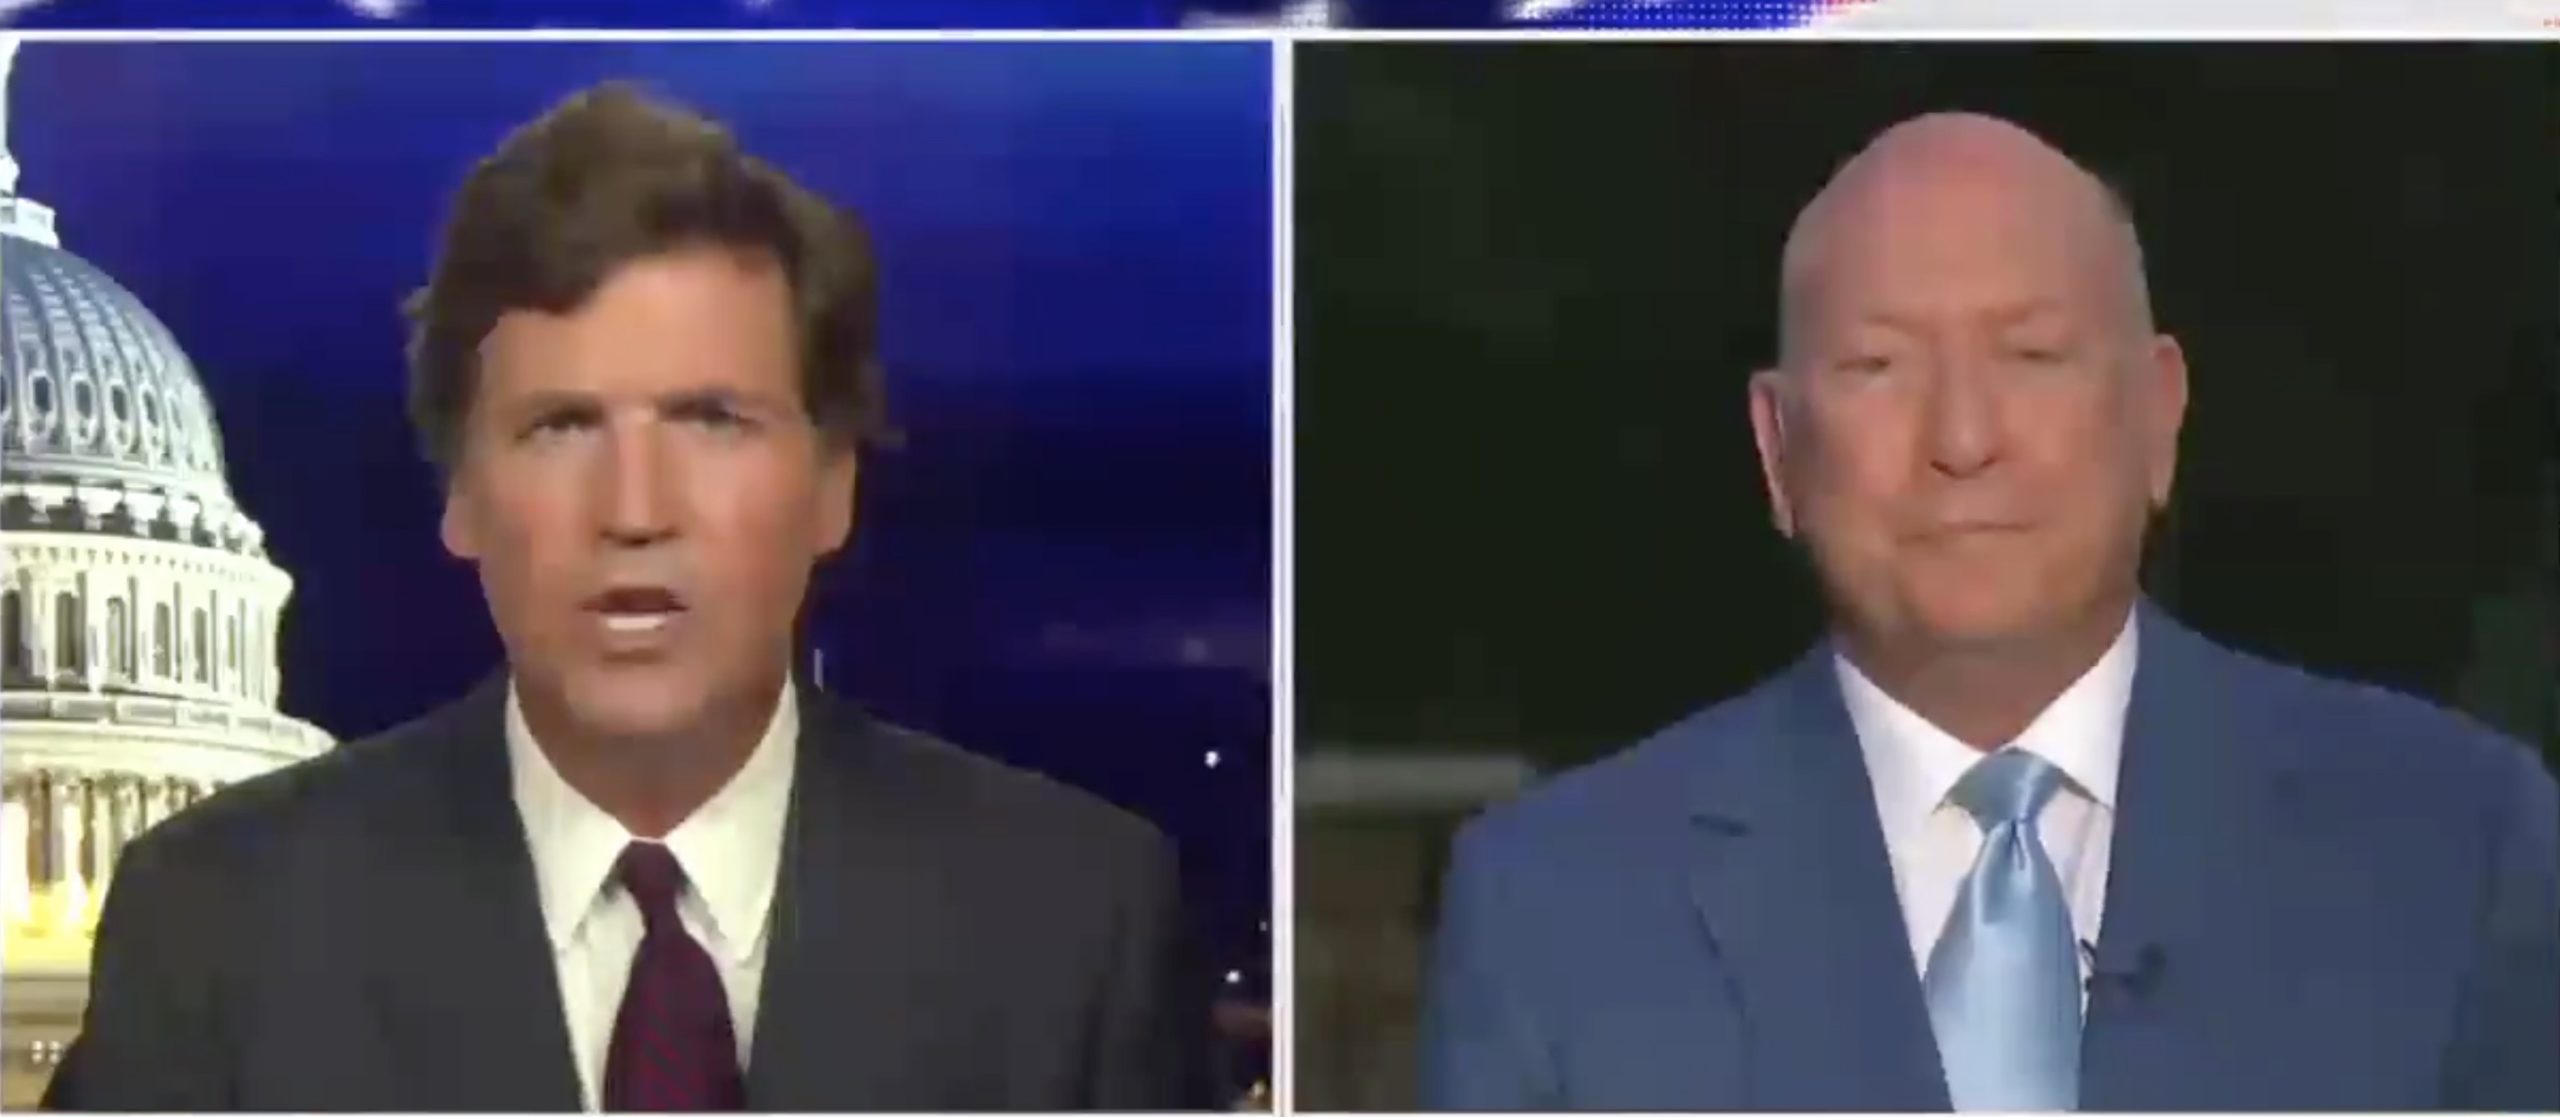 Tucker Carlson Throws A Fit After Guest Tells Him To Stop Mispronouncing Kamala Harris' Name